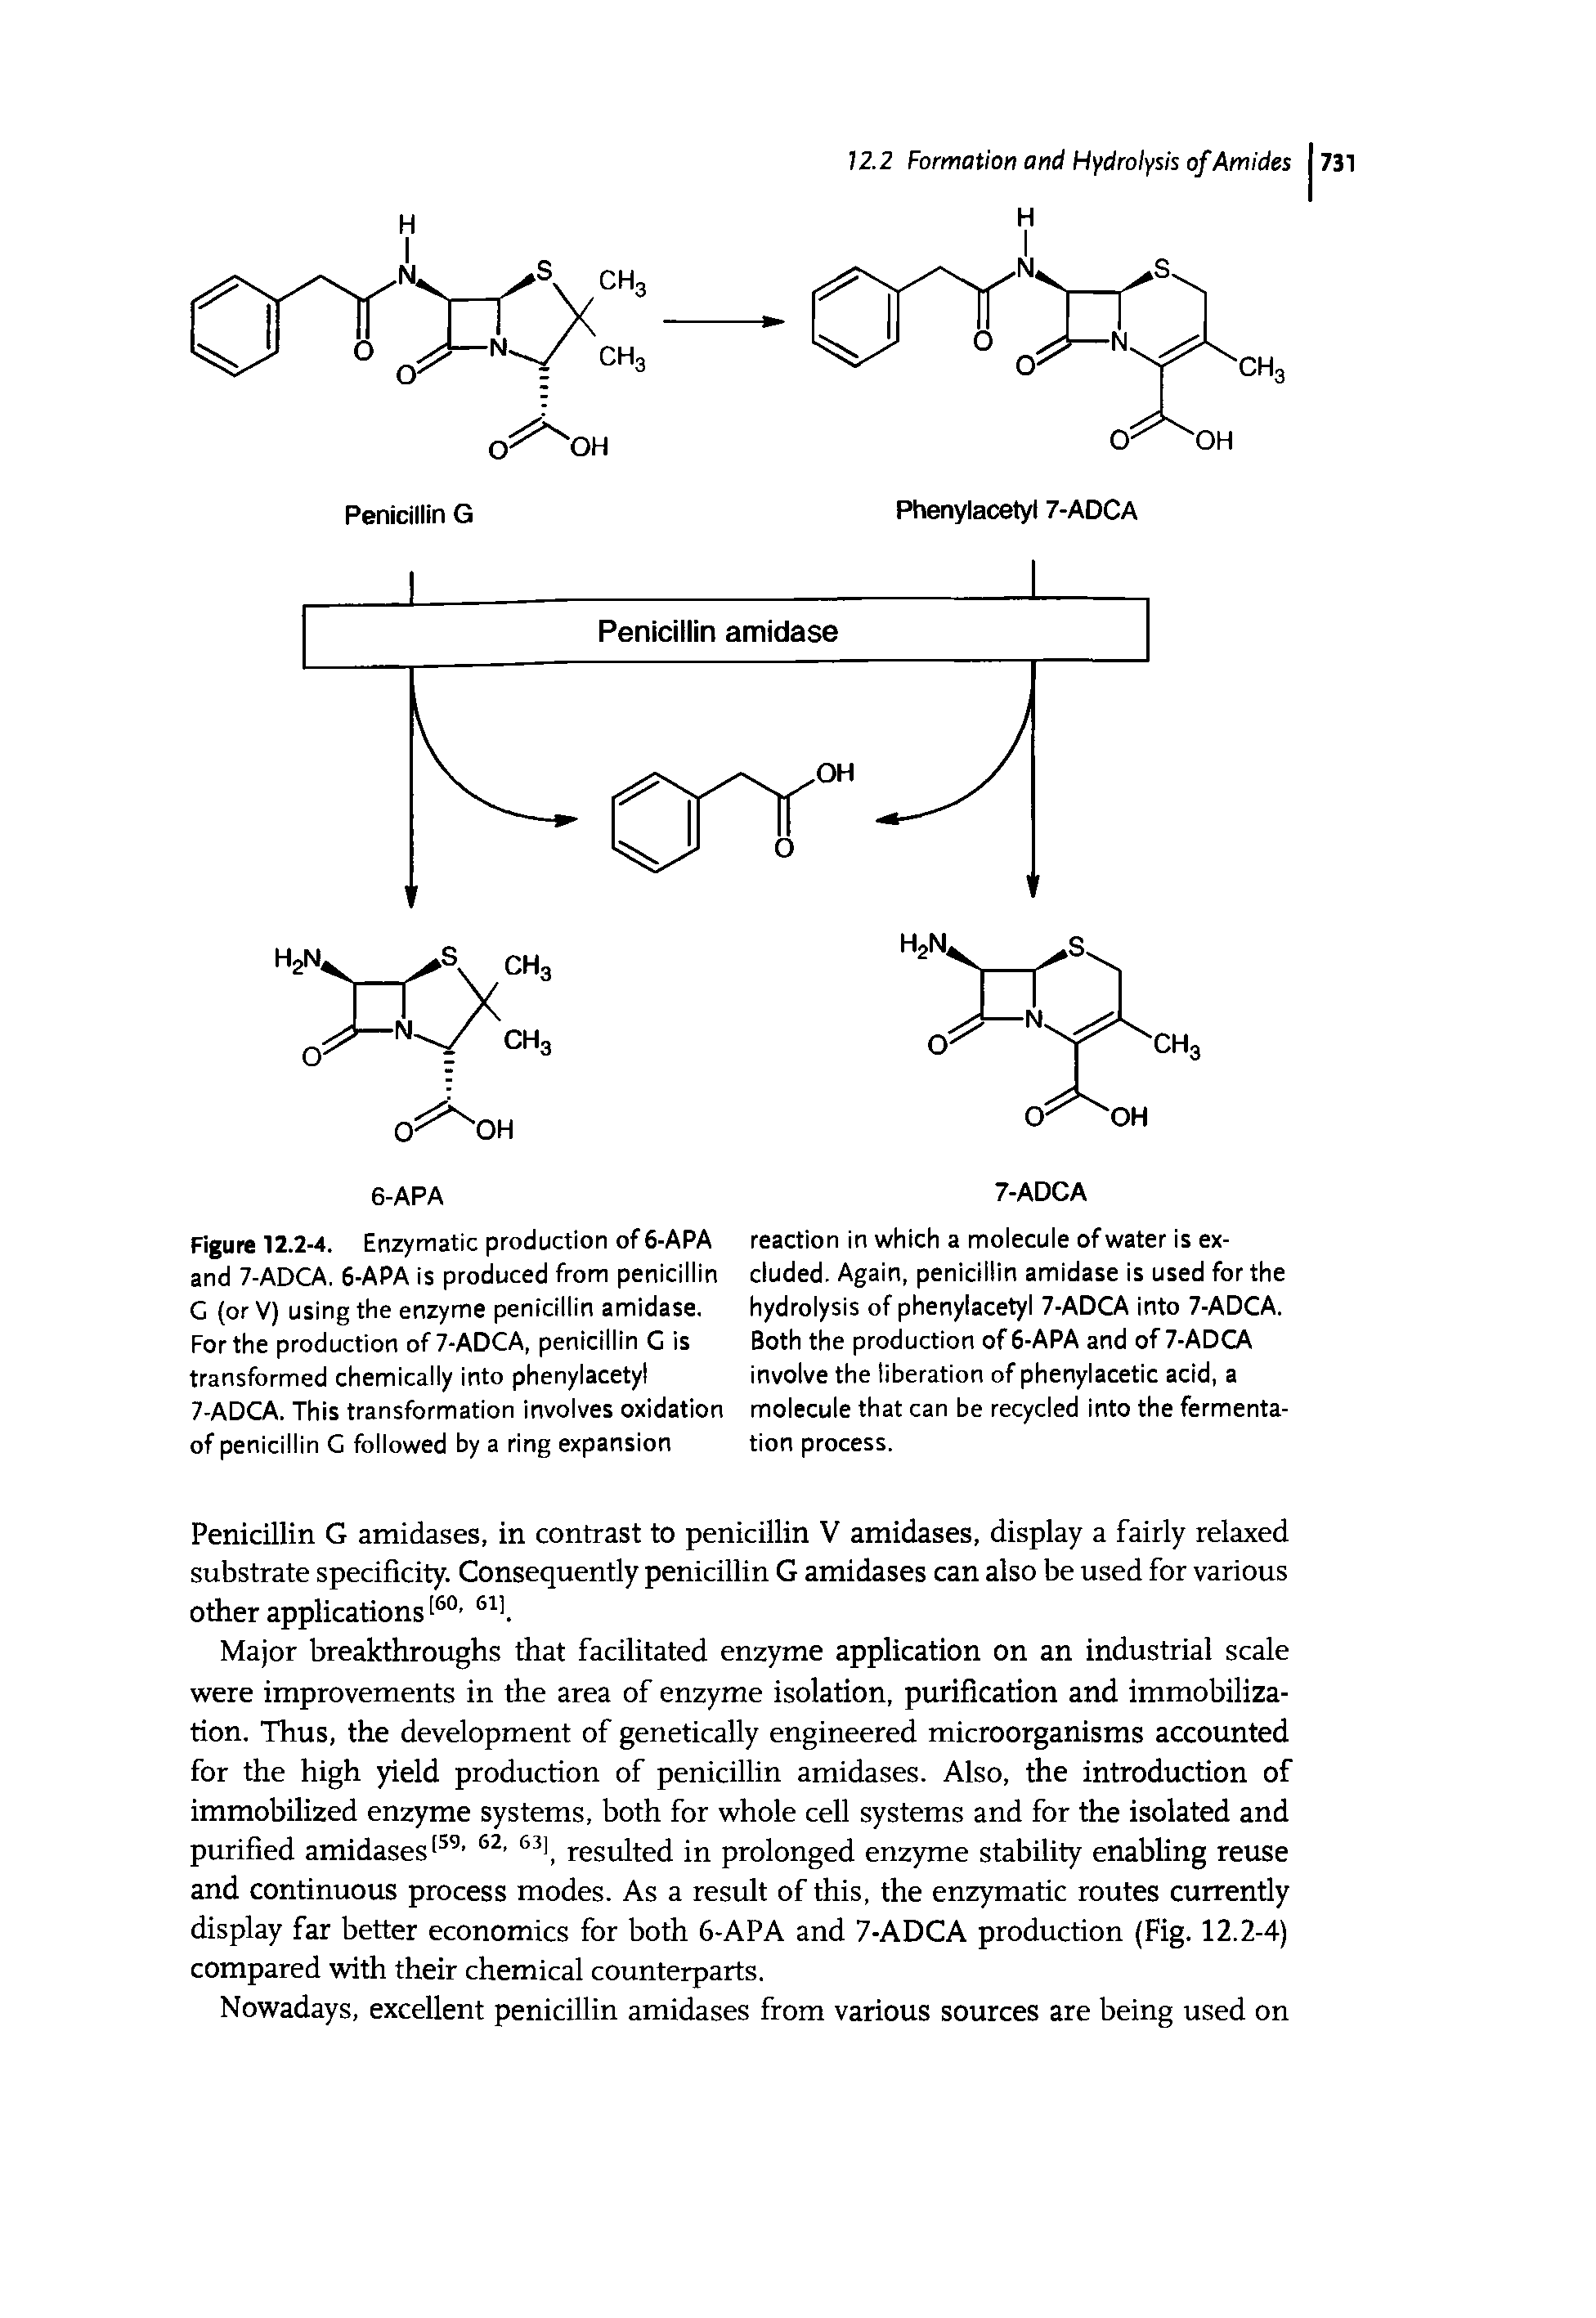 Figure 12.2-4. Enzymatic production of 6-APA and 7-ADCA. 6-APA is produced from penicillin C (or V) using the enzyme penicillin amidase. For the production of 7-ADCA, penicillin C is transformed chemically into phenylacetyl 7-ADCA. This transformation involves oxidation of penicillin C followed by a ring expansion...